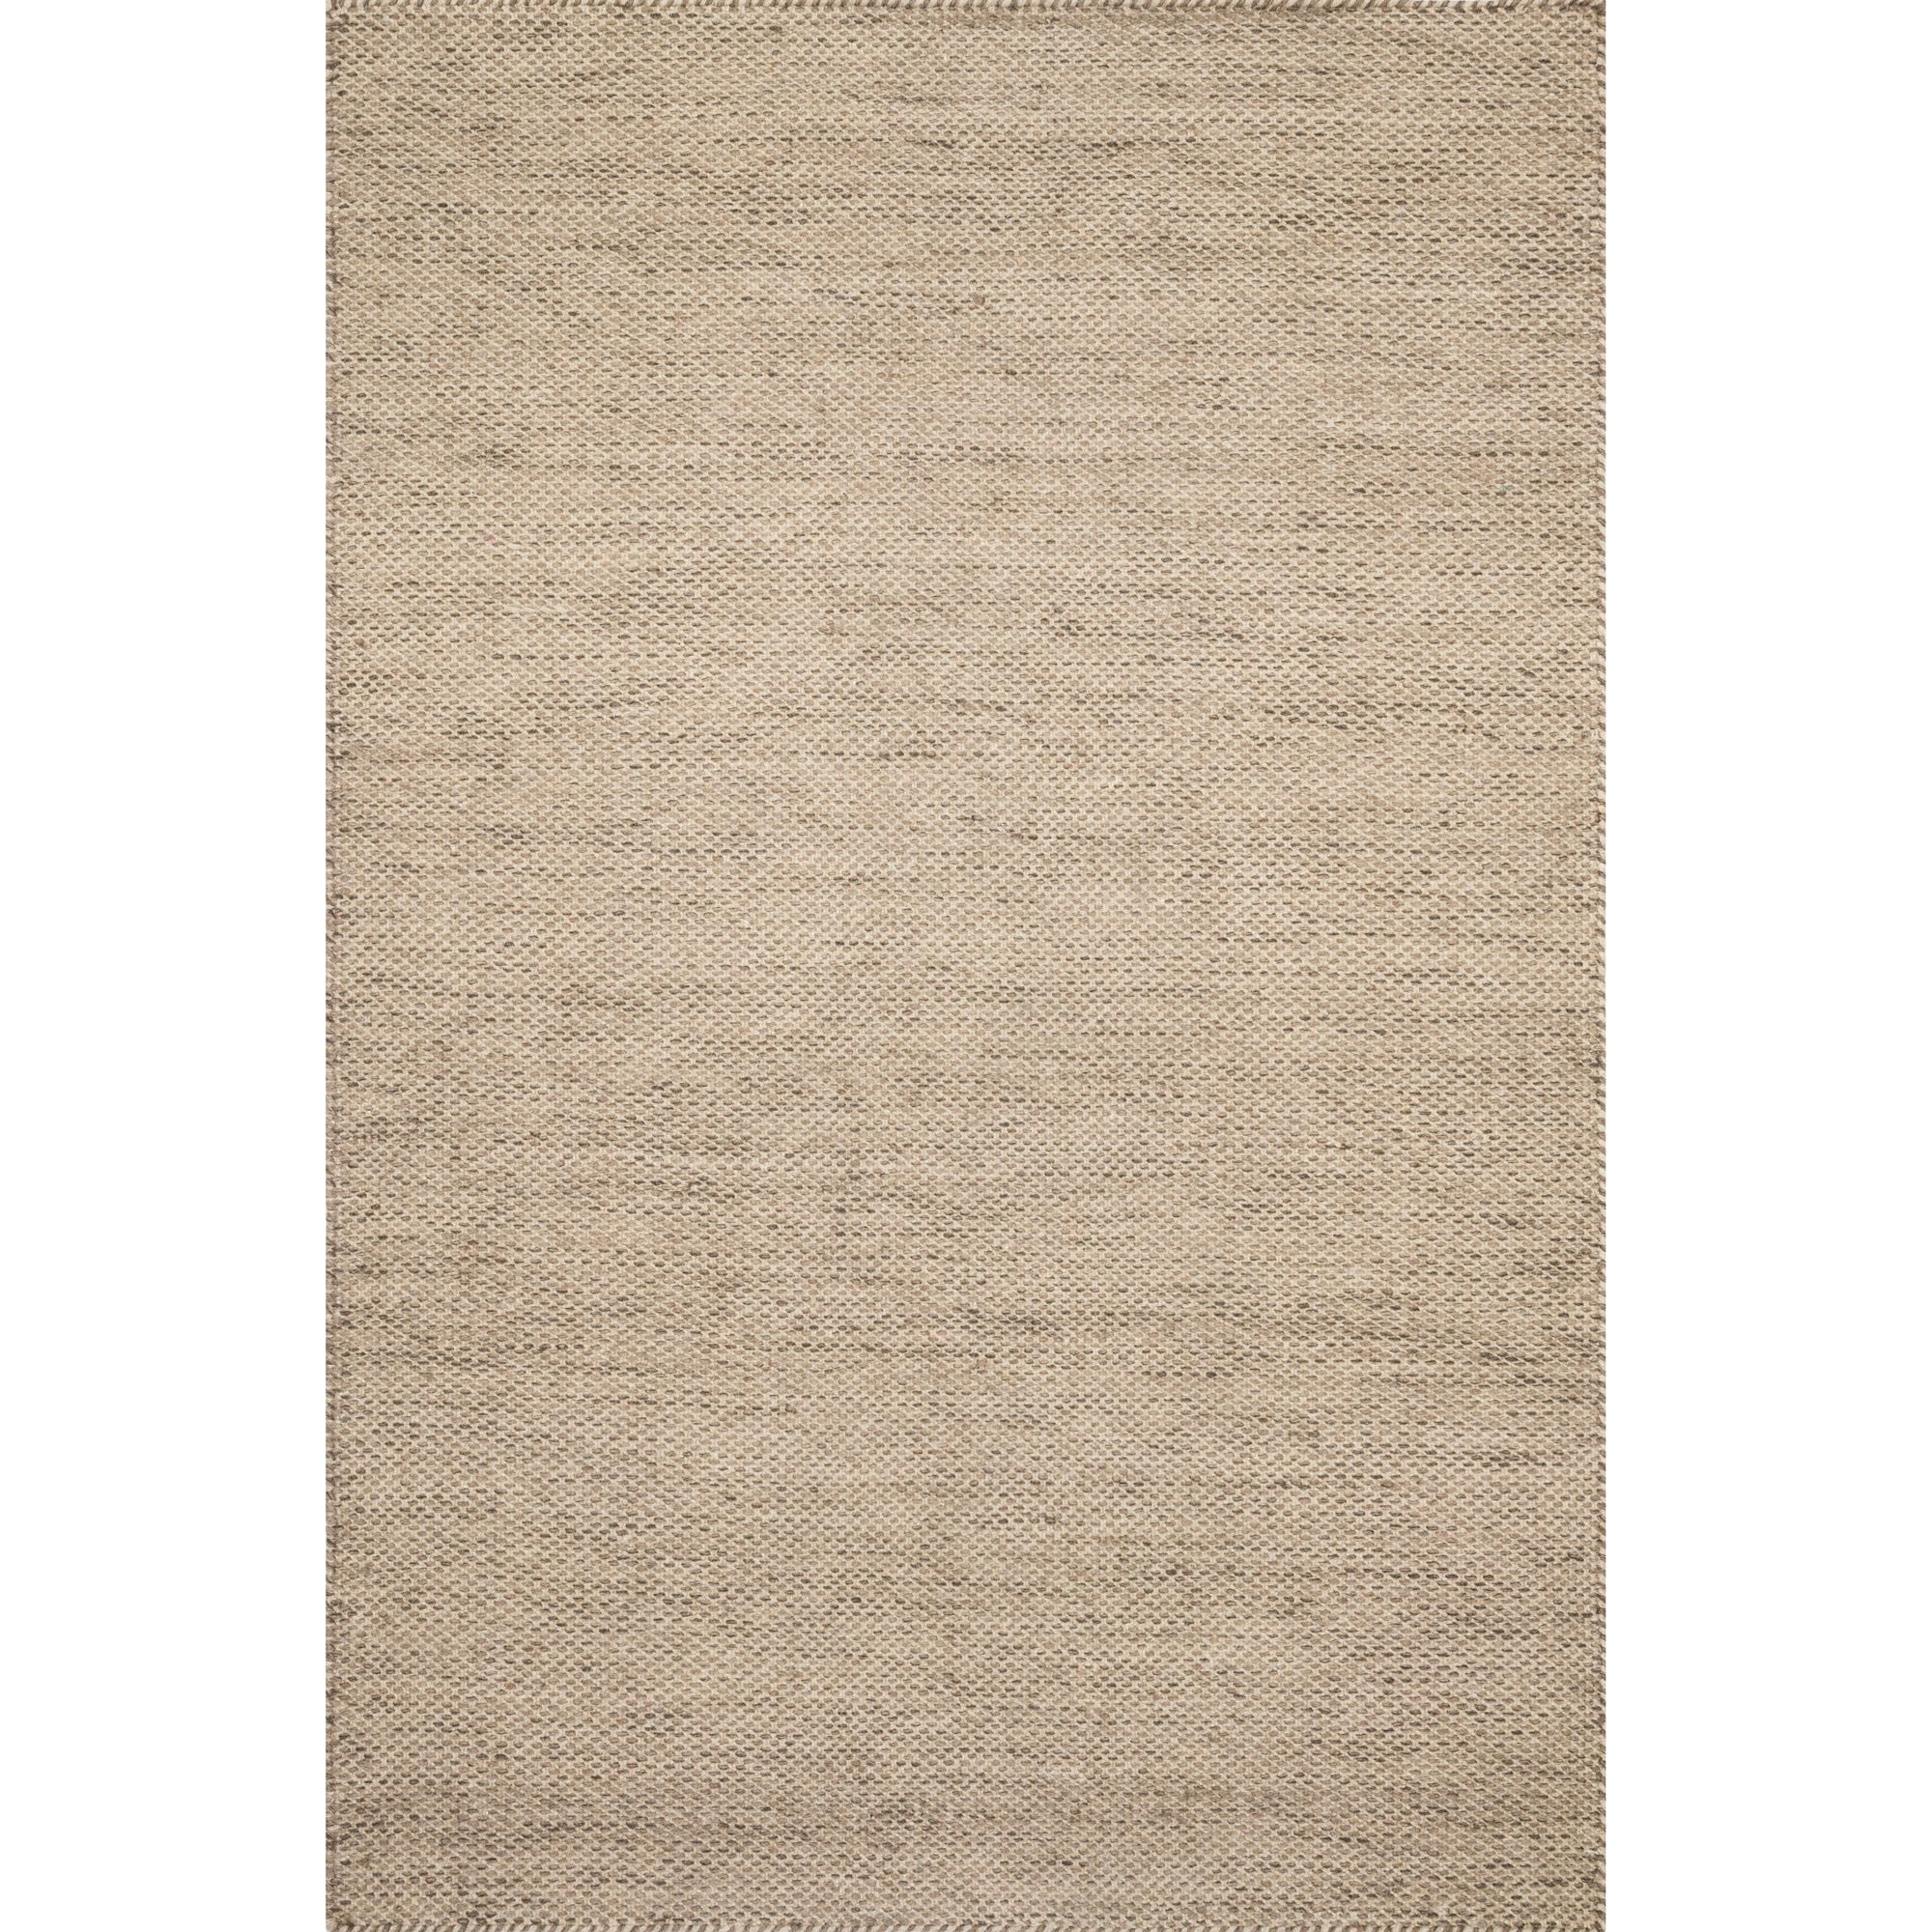 Rugs by Roo Loloi Oakwood Wheat Area Rug in size 3' 6" x 5' 6"